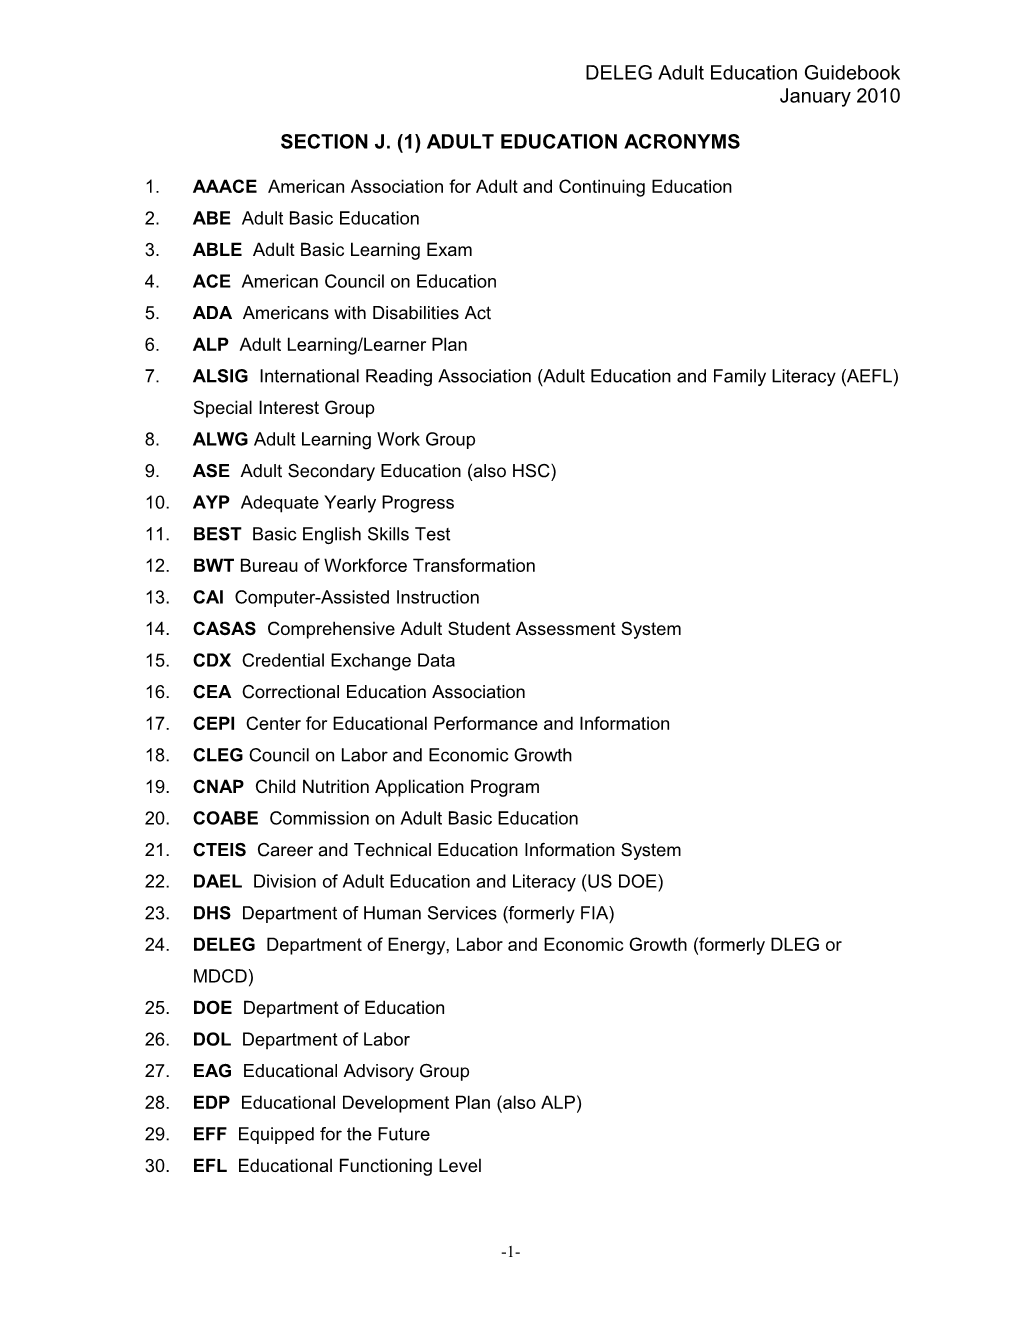 Section J. (1) Adult Education Acronyms